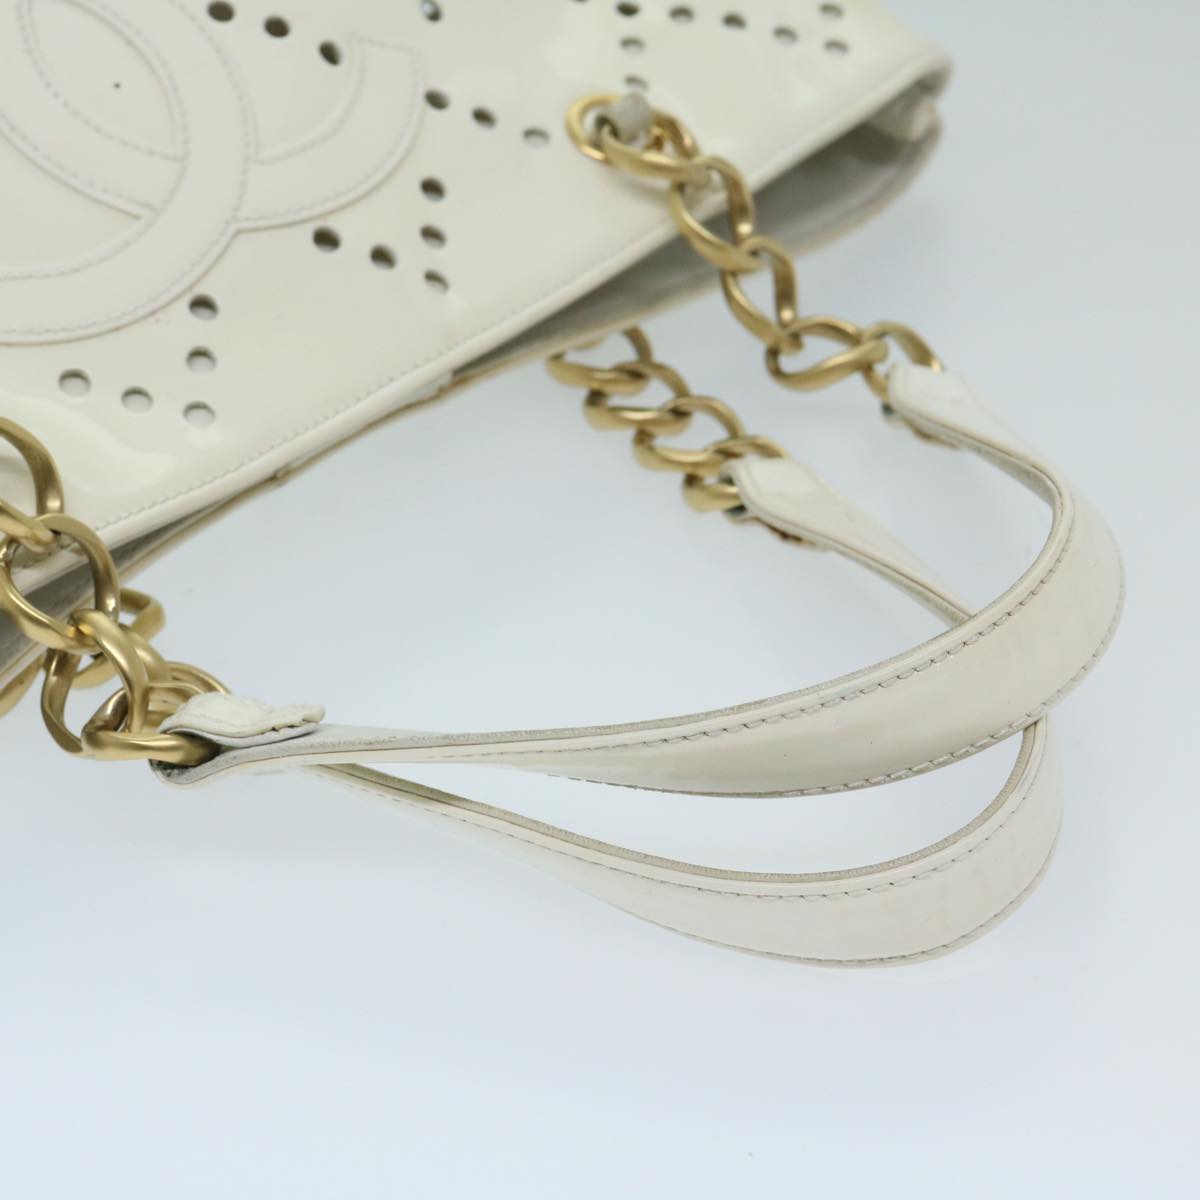 CHANEL Chain Hand Bag Patent leather White CC Auth bs11236